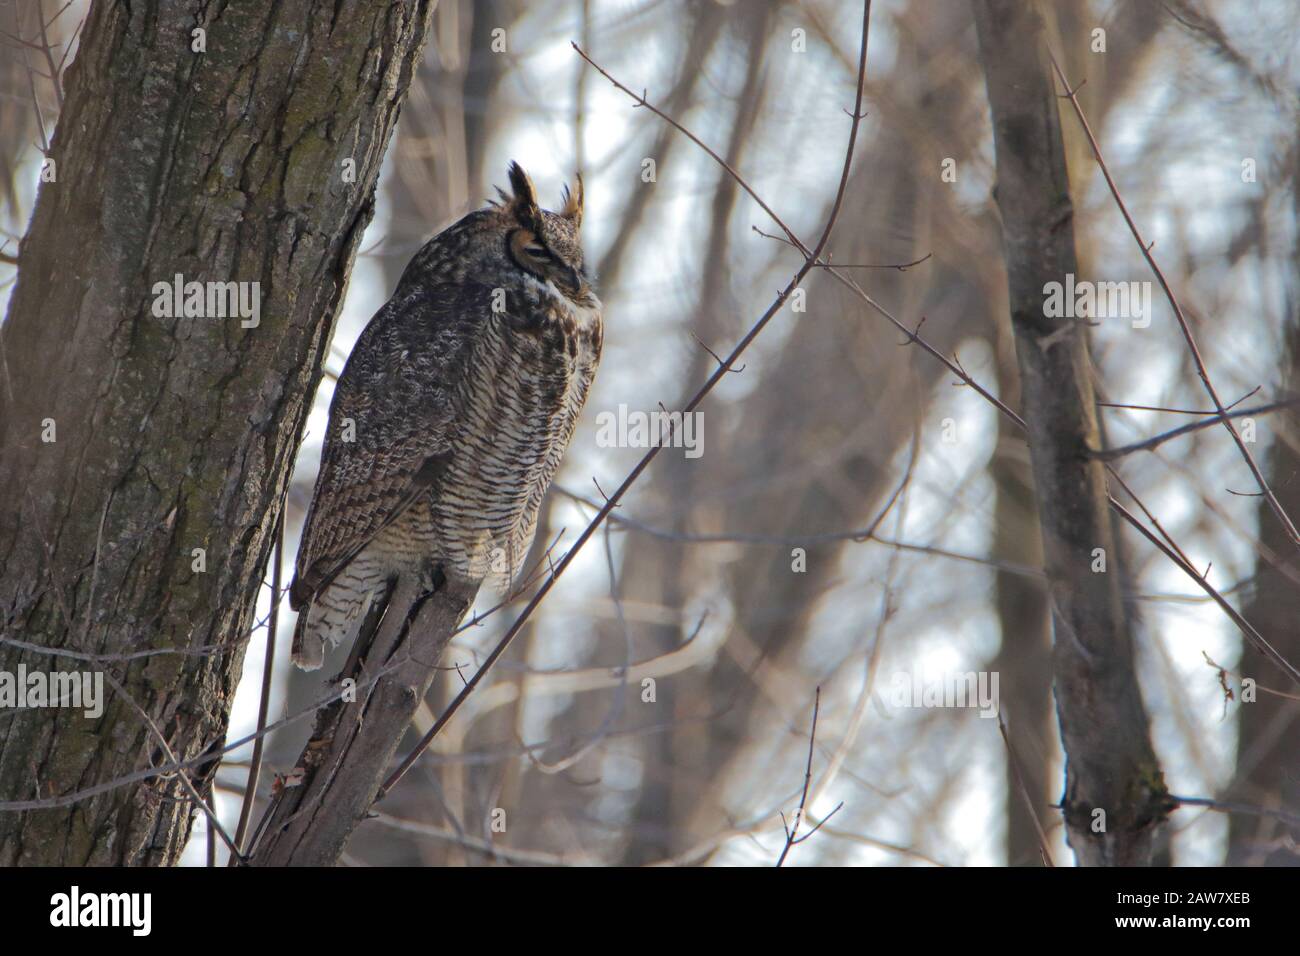 Great Horned Owl perched on tree in forest Stock Photo